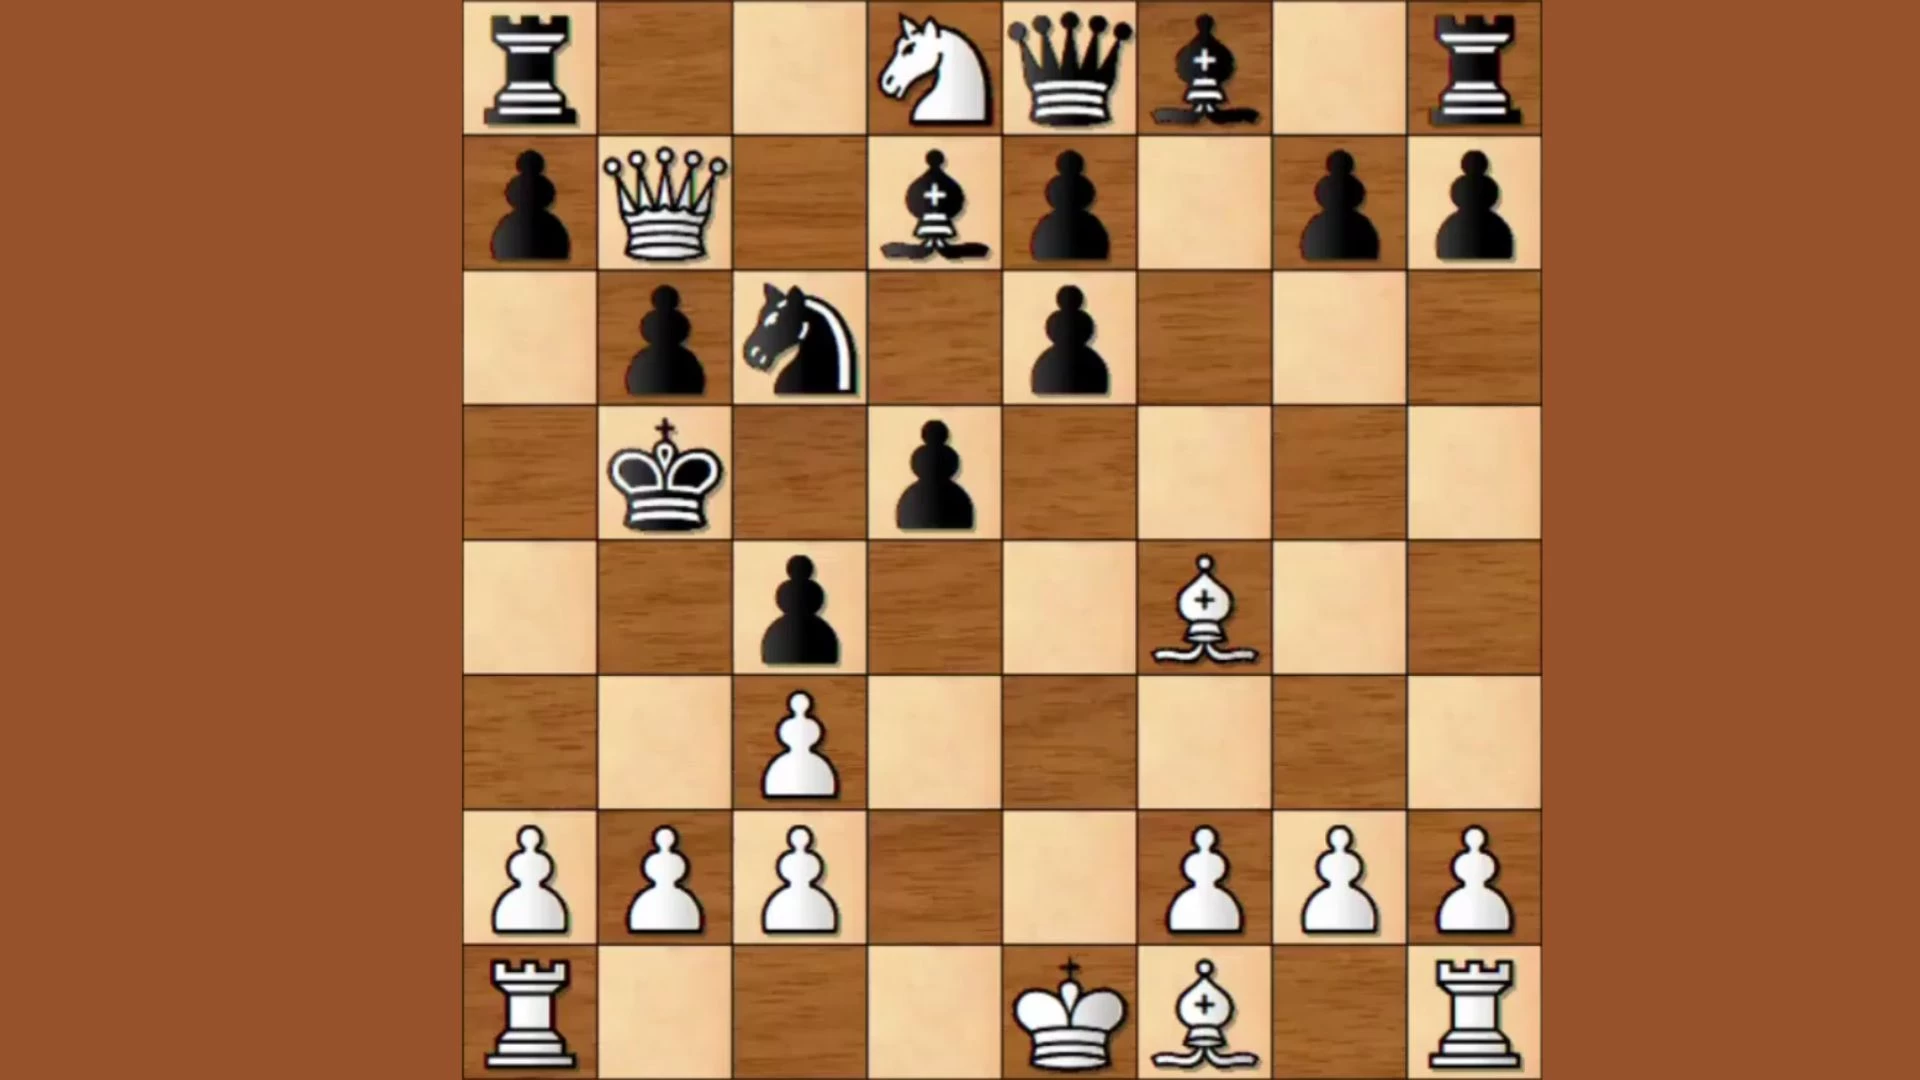 Can You Find The Four Moves to Win in This Chess Puzzle?